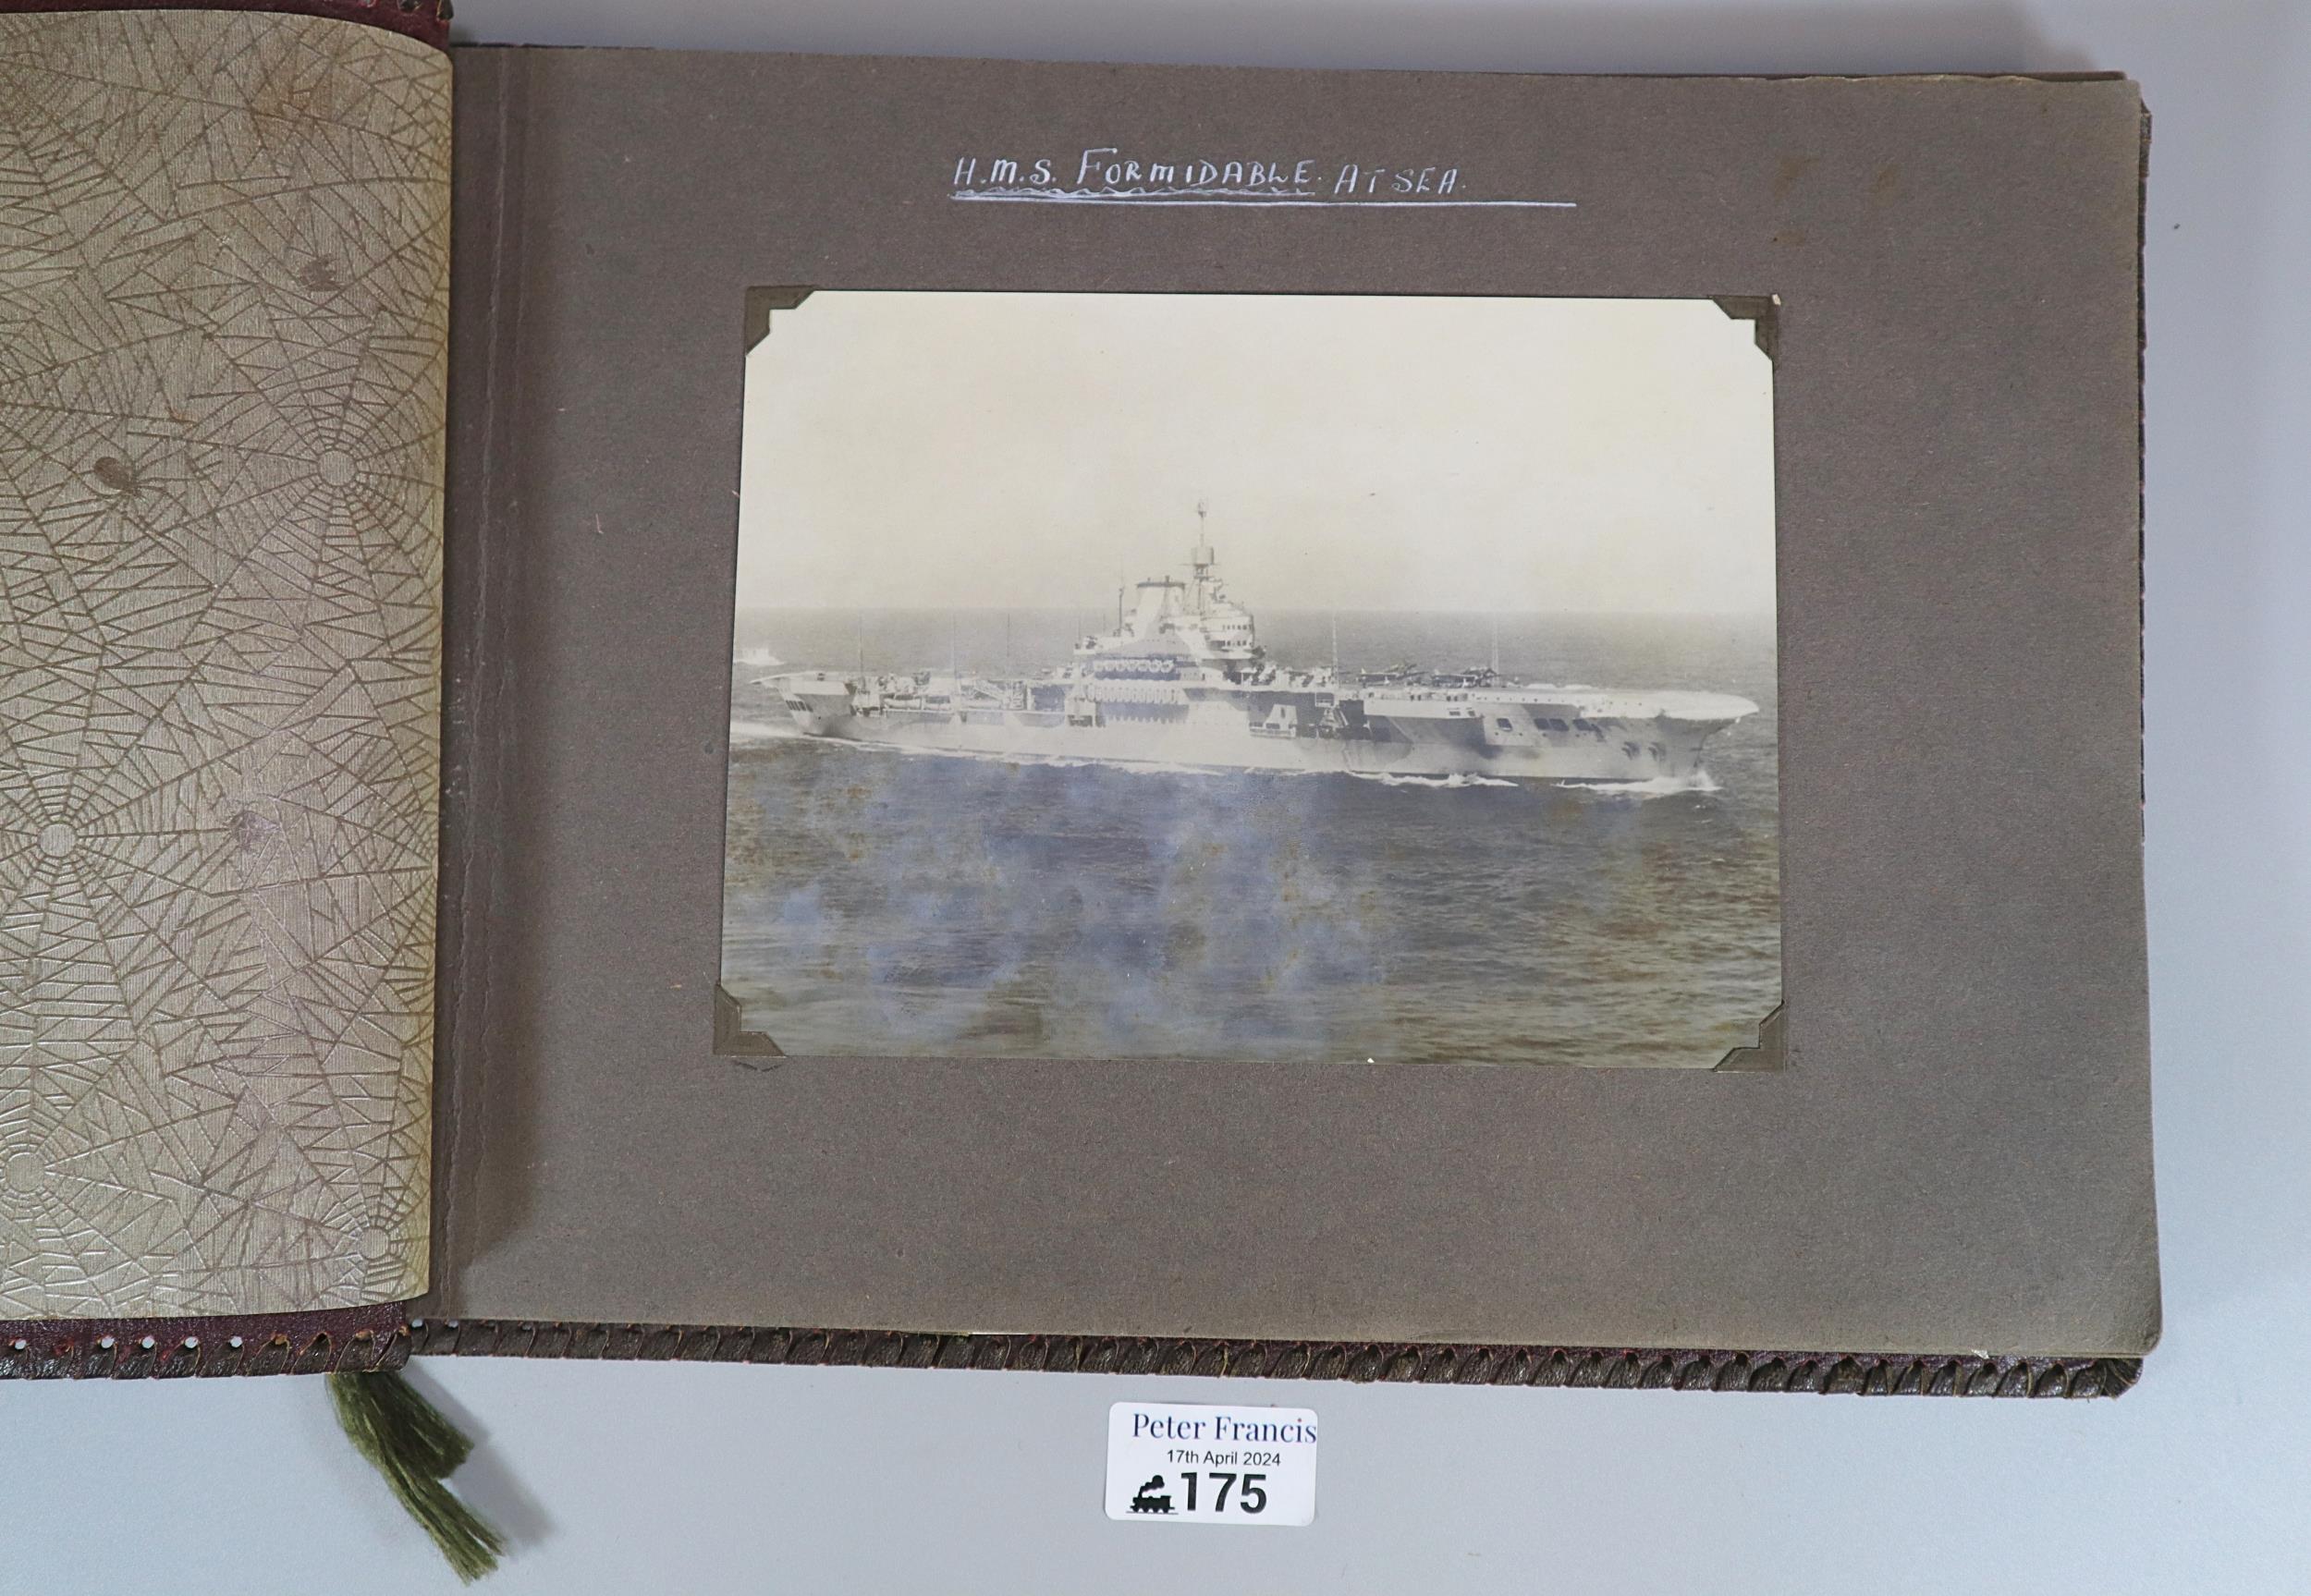 Interesting WWII photograph album, featuring images of the Aircraft Carrier HMS Formidable at sea,